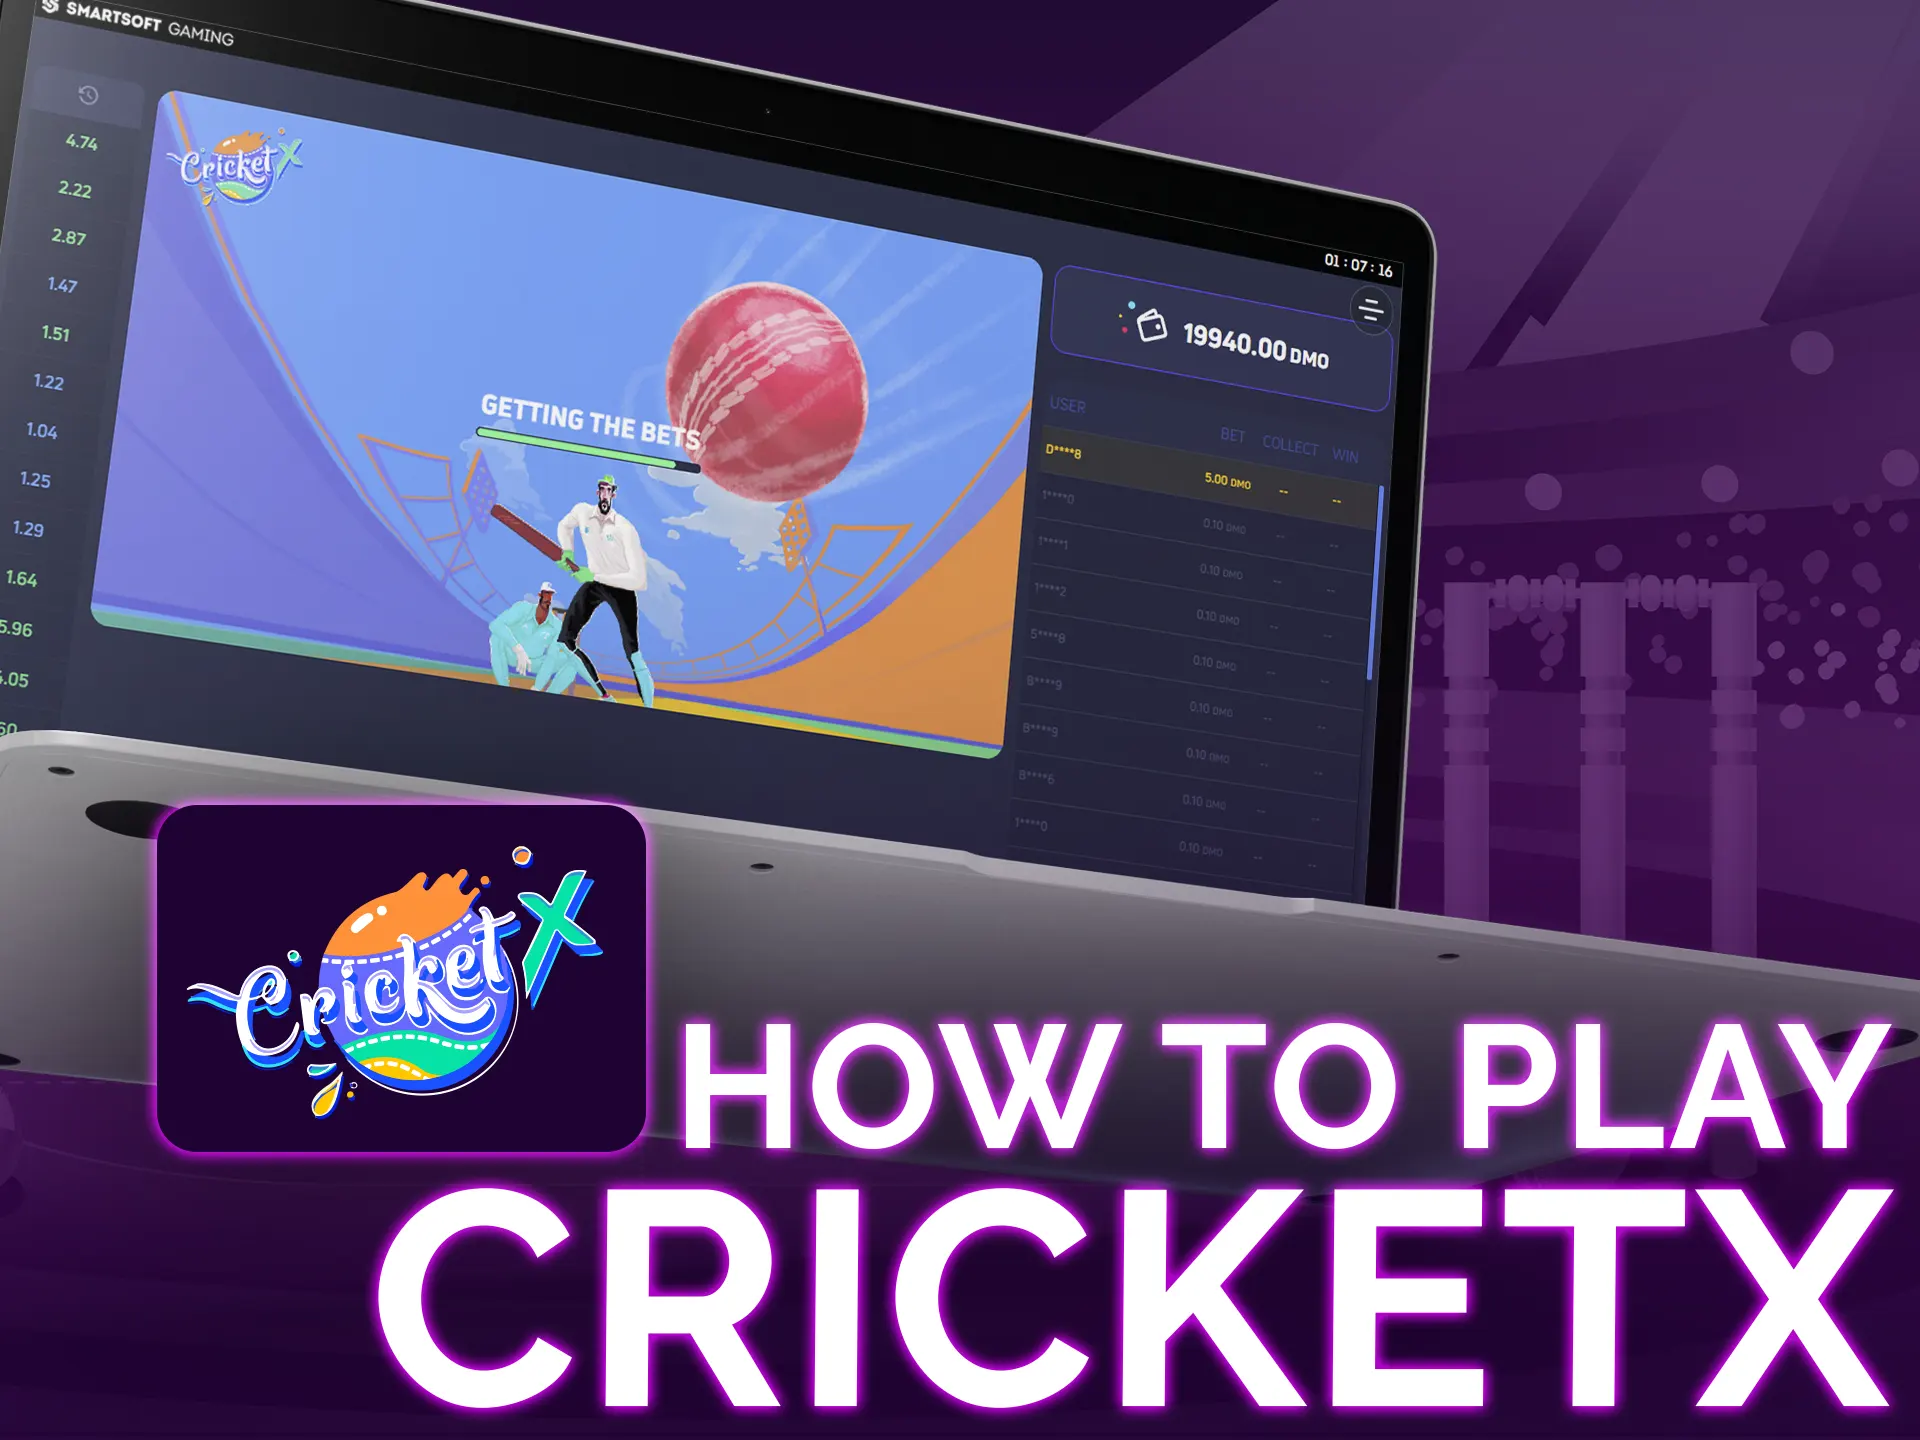 To play Cricket X, follow these steps.